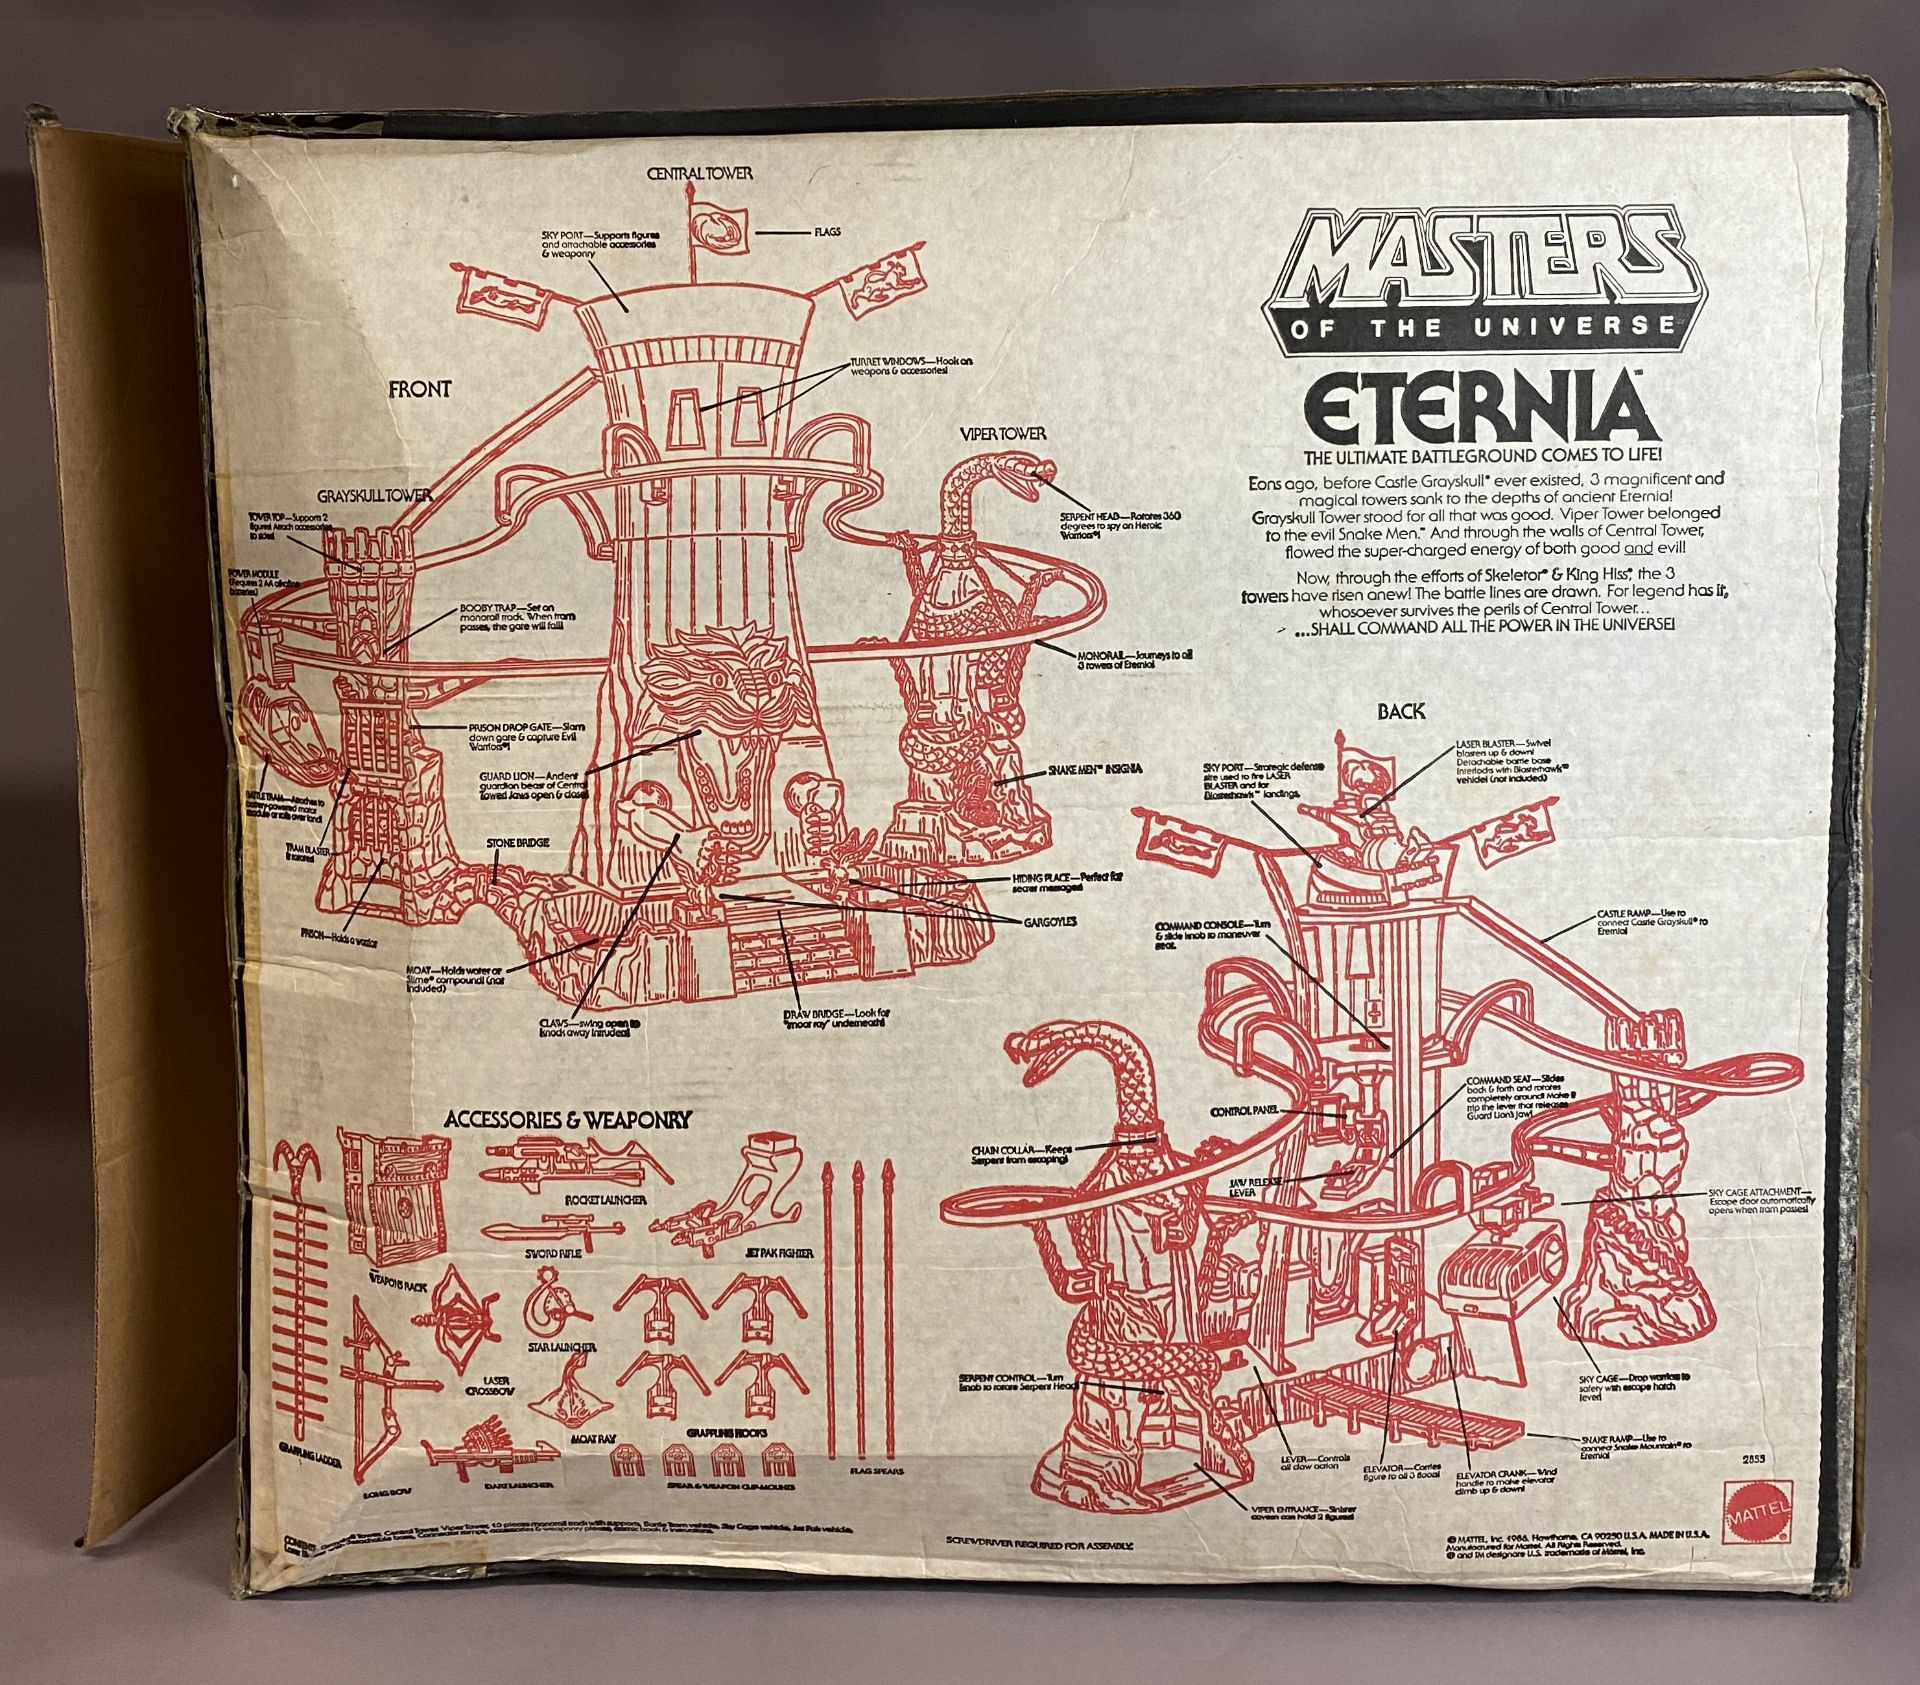 ETERNIA - Vintage Masters of the Universe Playset and Original Box (MOTU) - Appears to be complete - Image 96 of 125